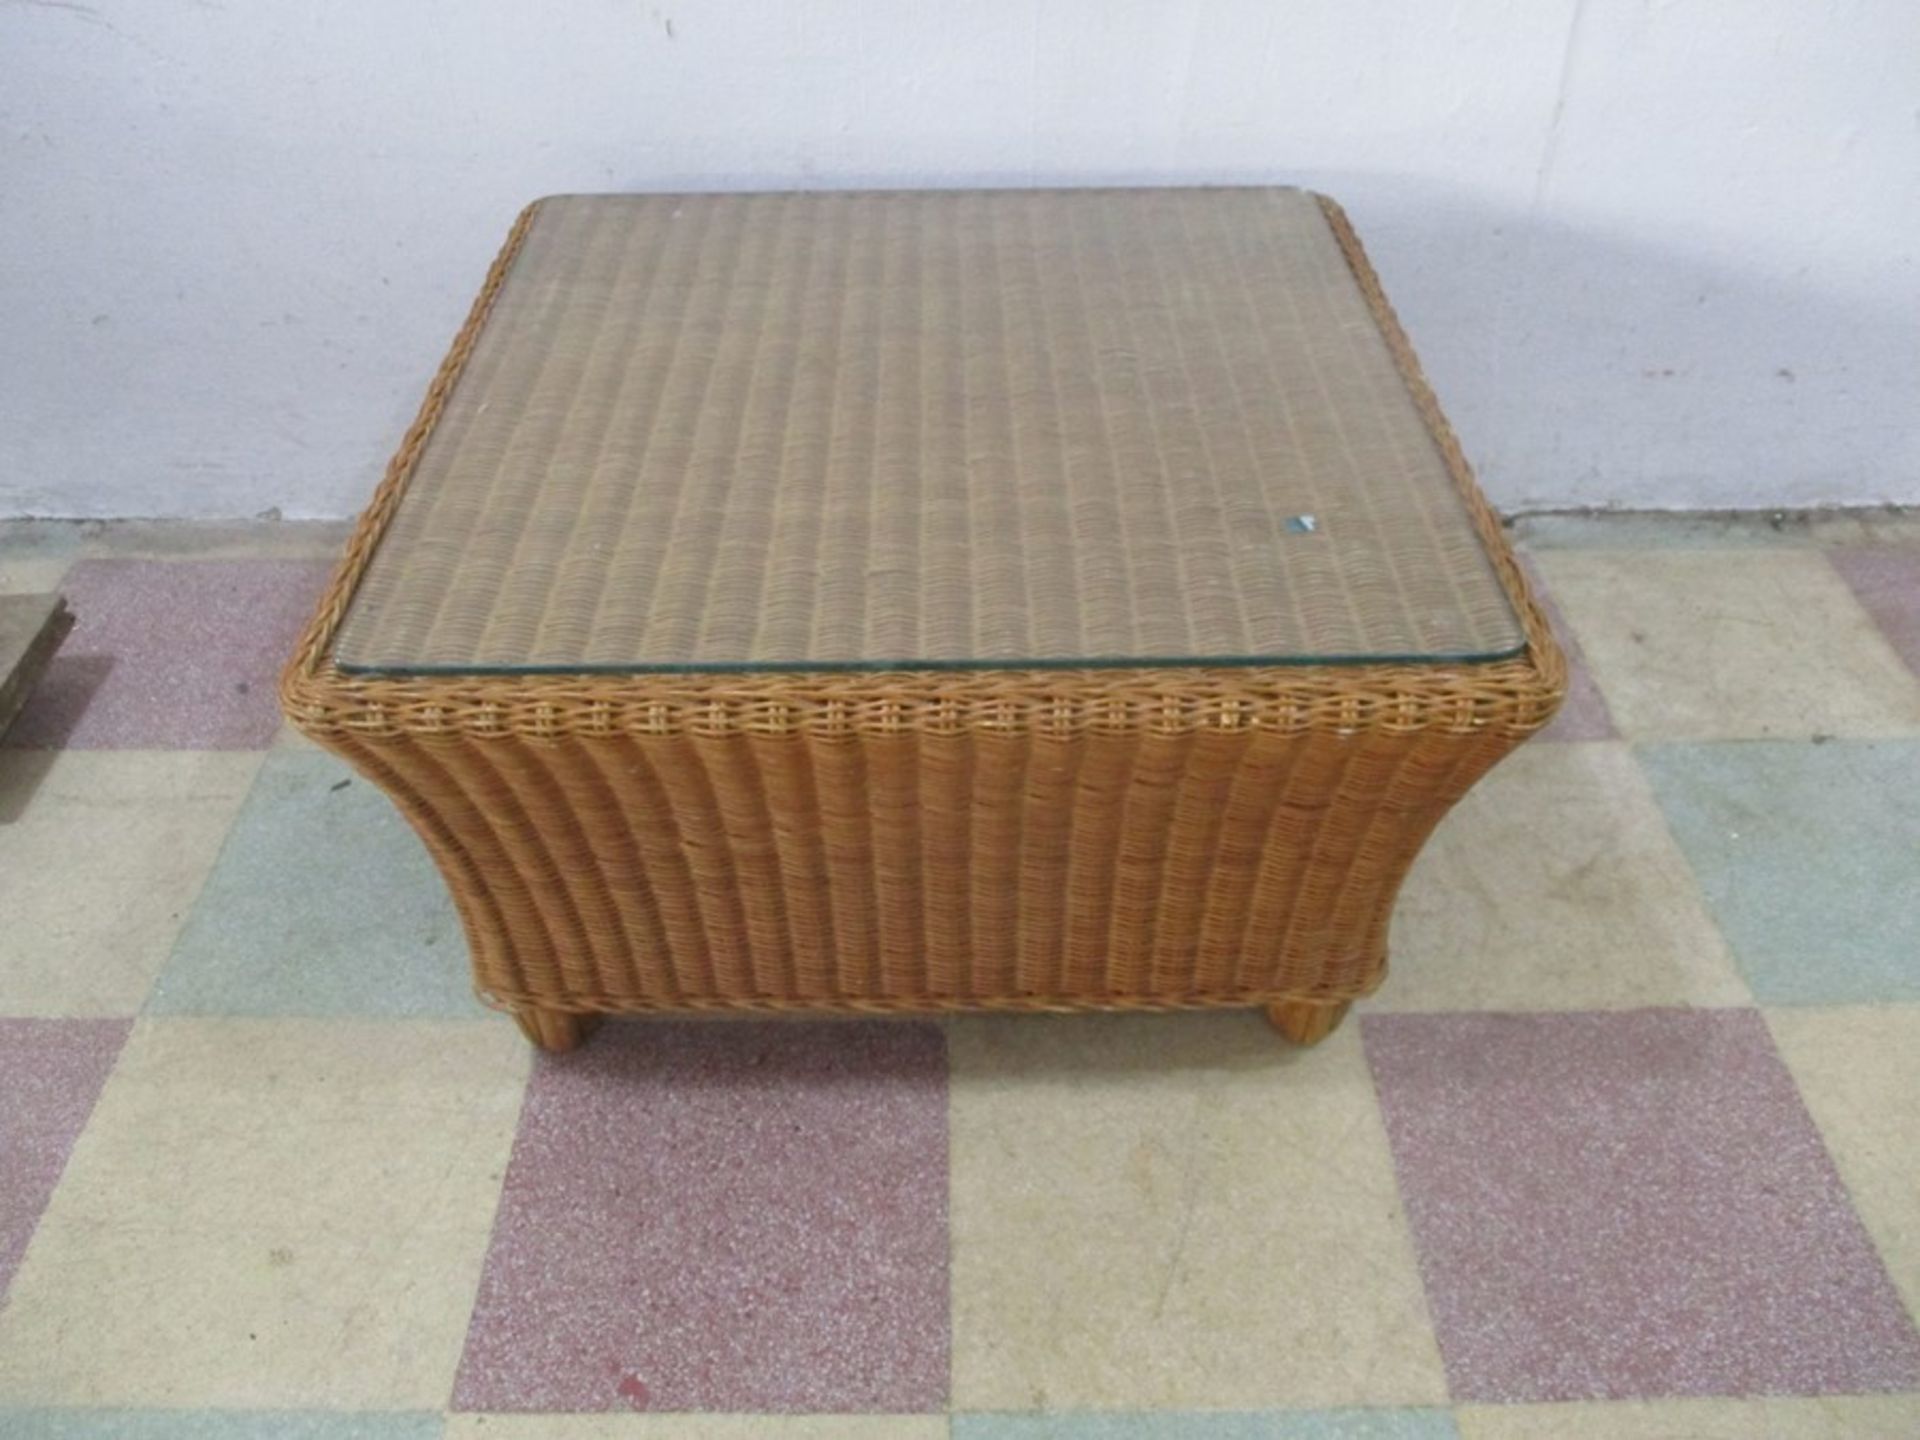 A wicker coffee table with glass top